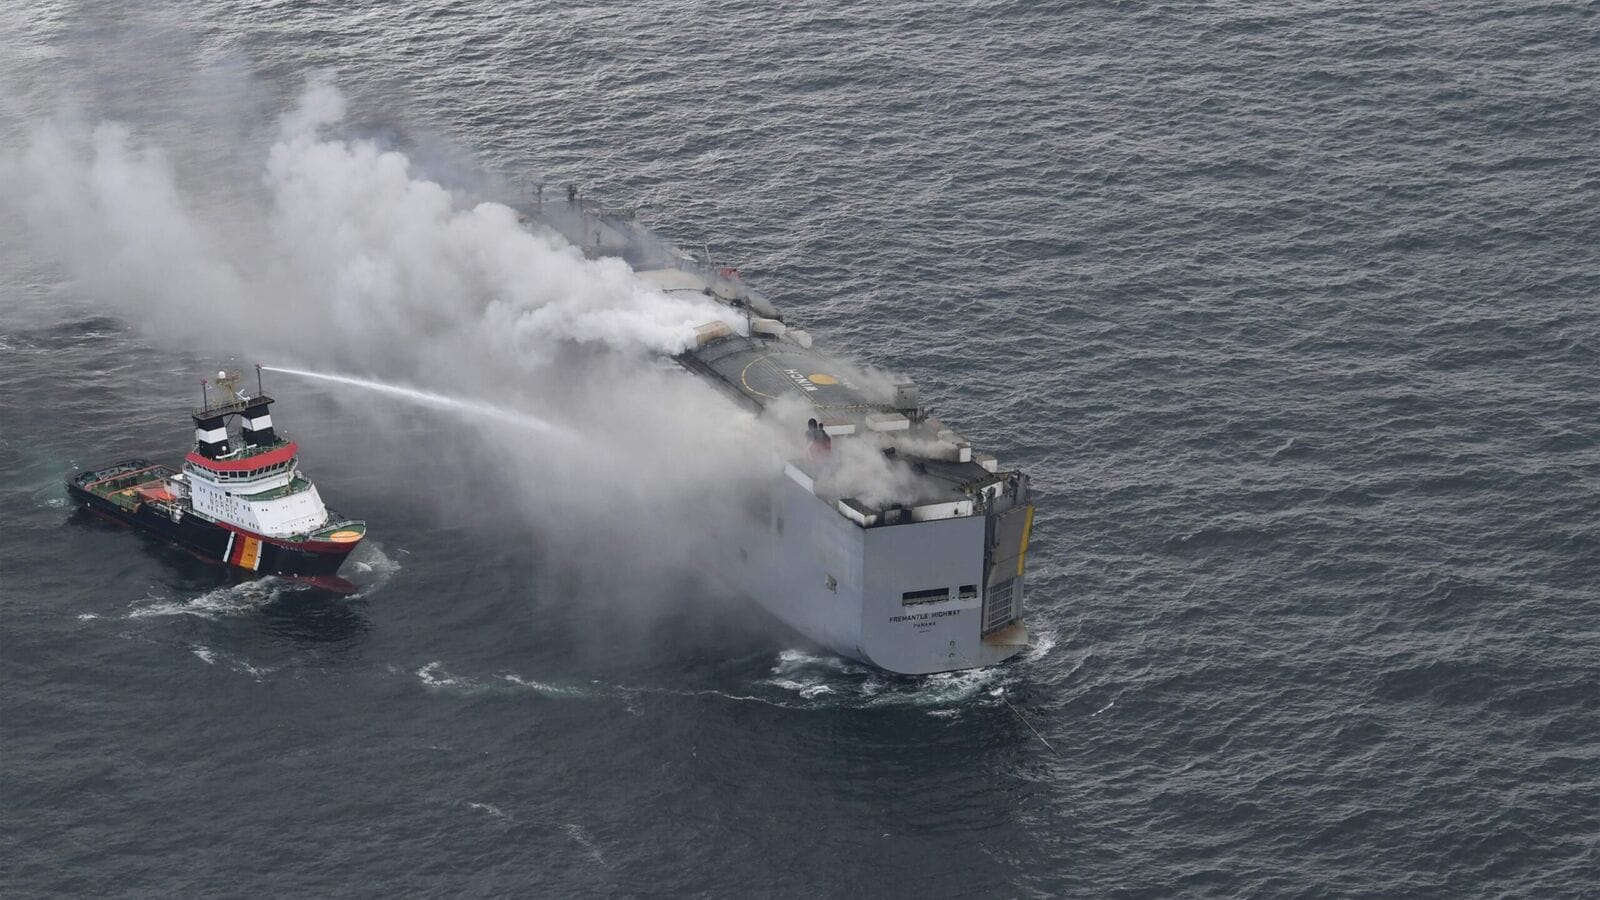 Over 500 EVs from BMW, Mercedes possibly charred on-board burning cargo ship